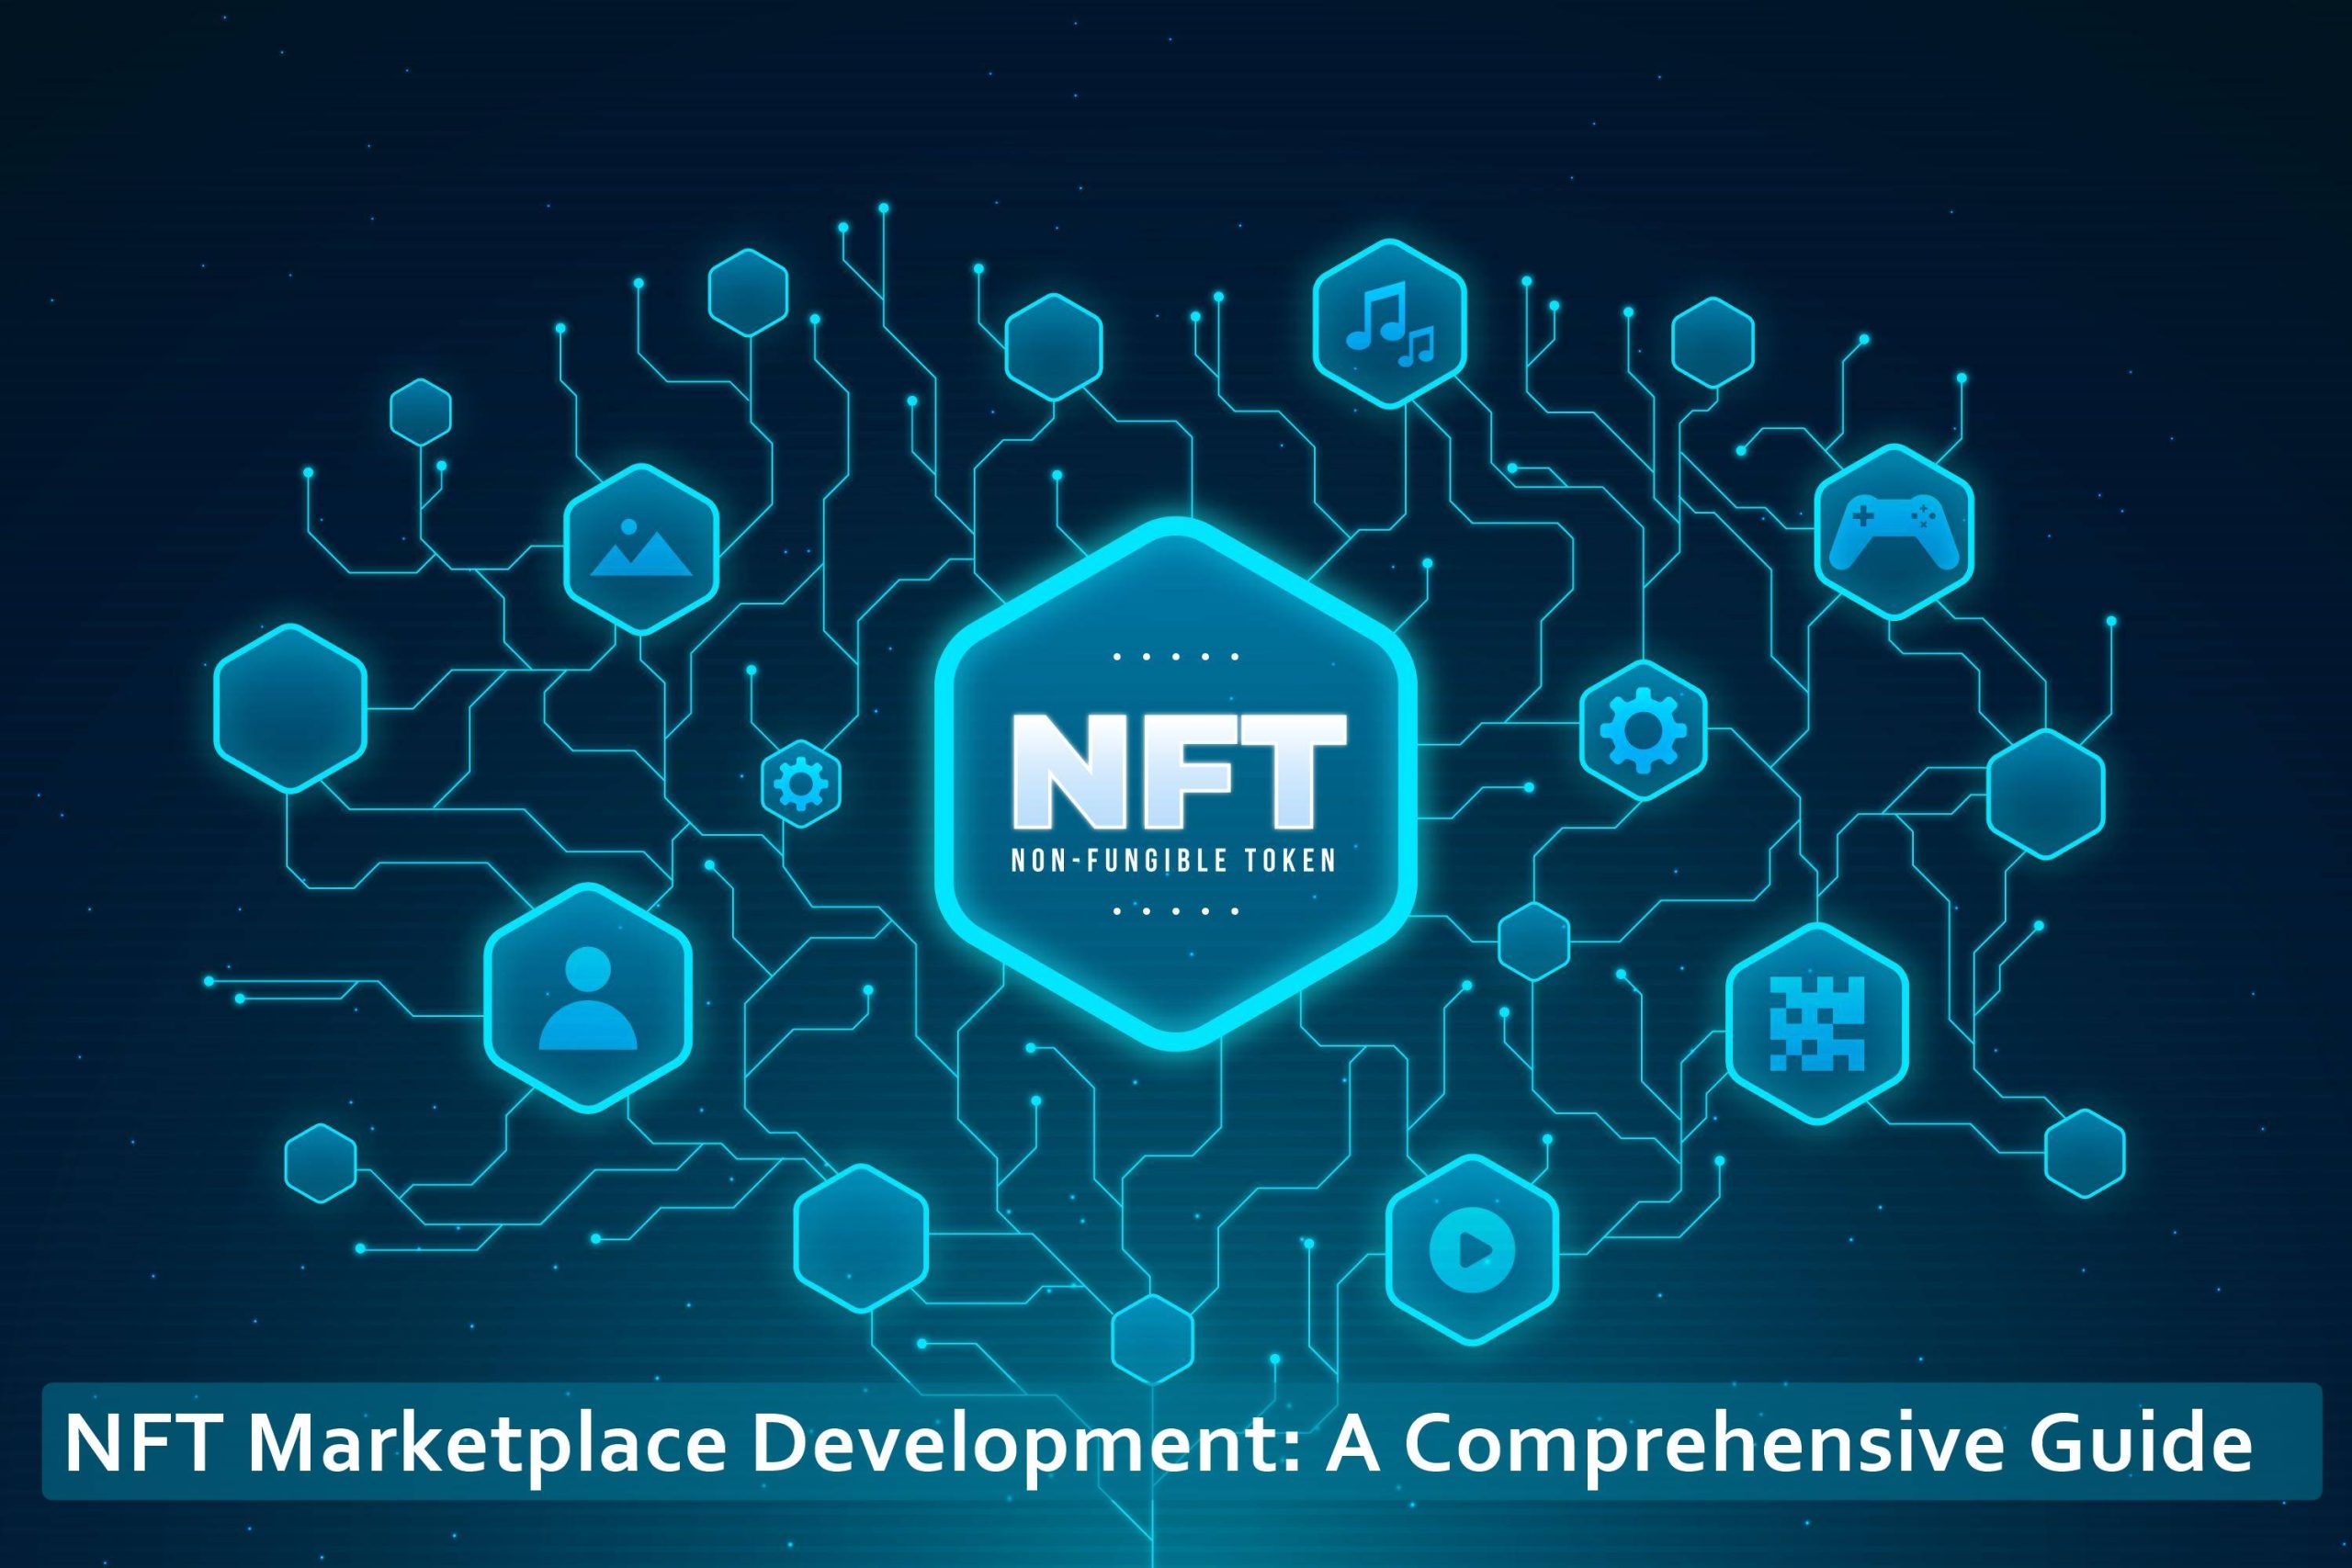 A Comprehensive Guide To NFT Marketplace Development